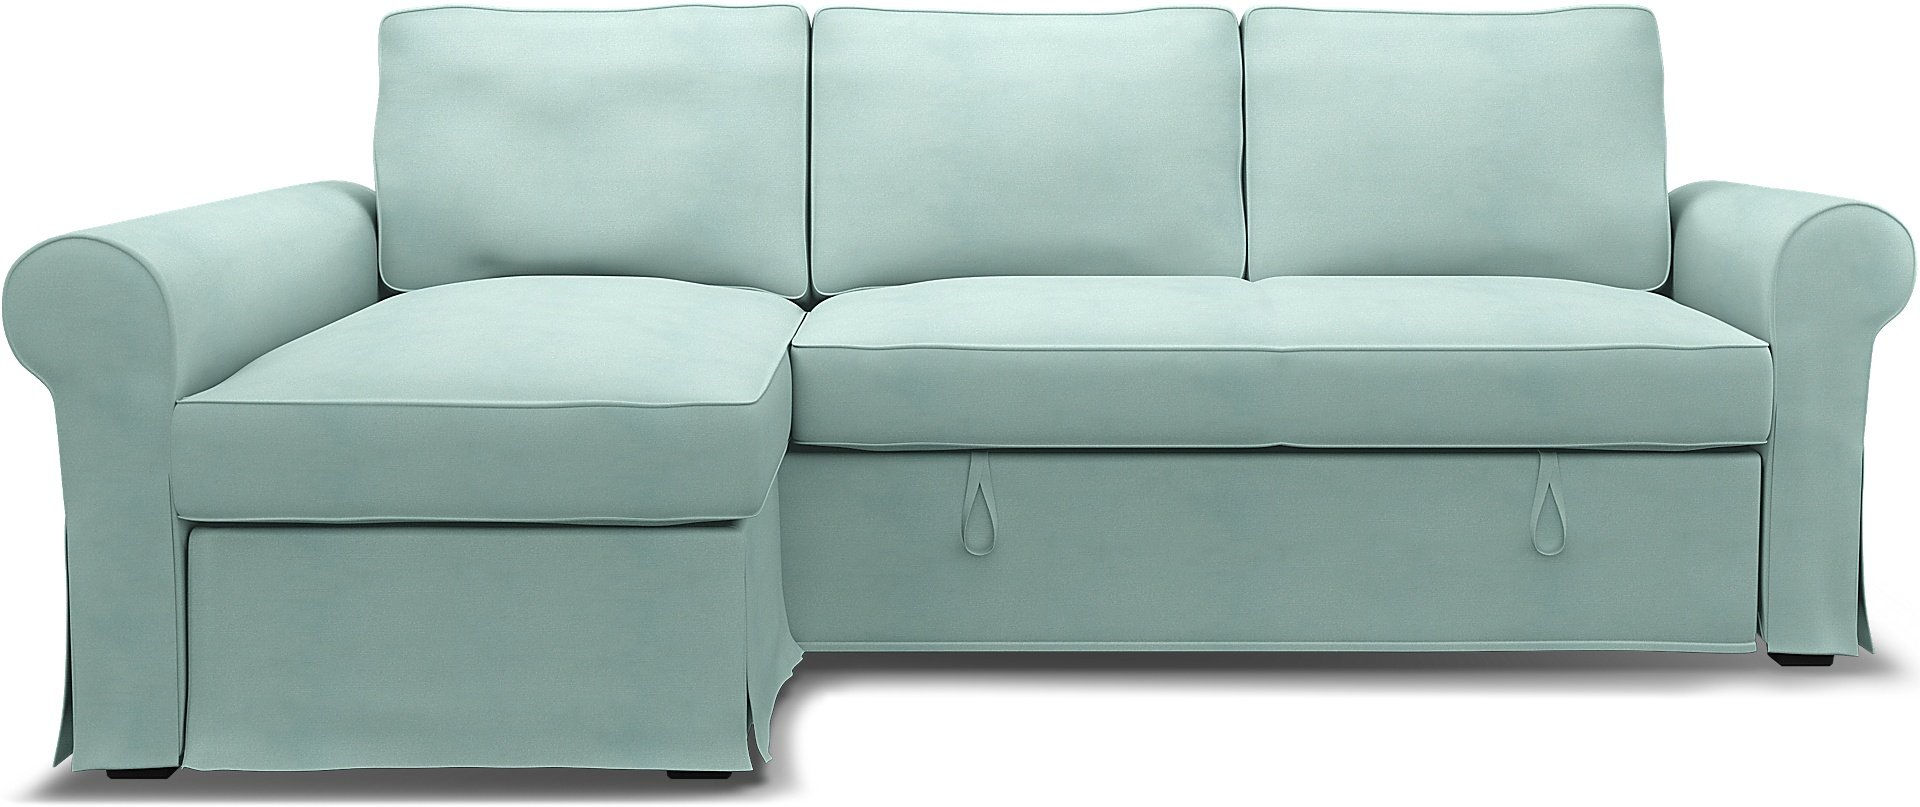 IKEA - Backabro Sofabed with Chaise Cover, Mineral Blue, Linen - Bemz